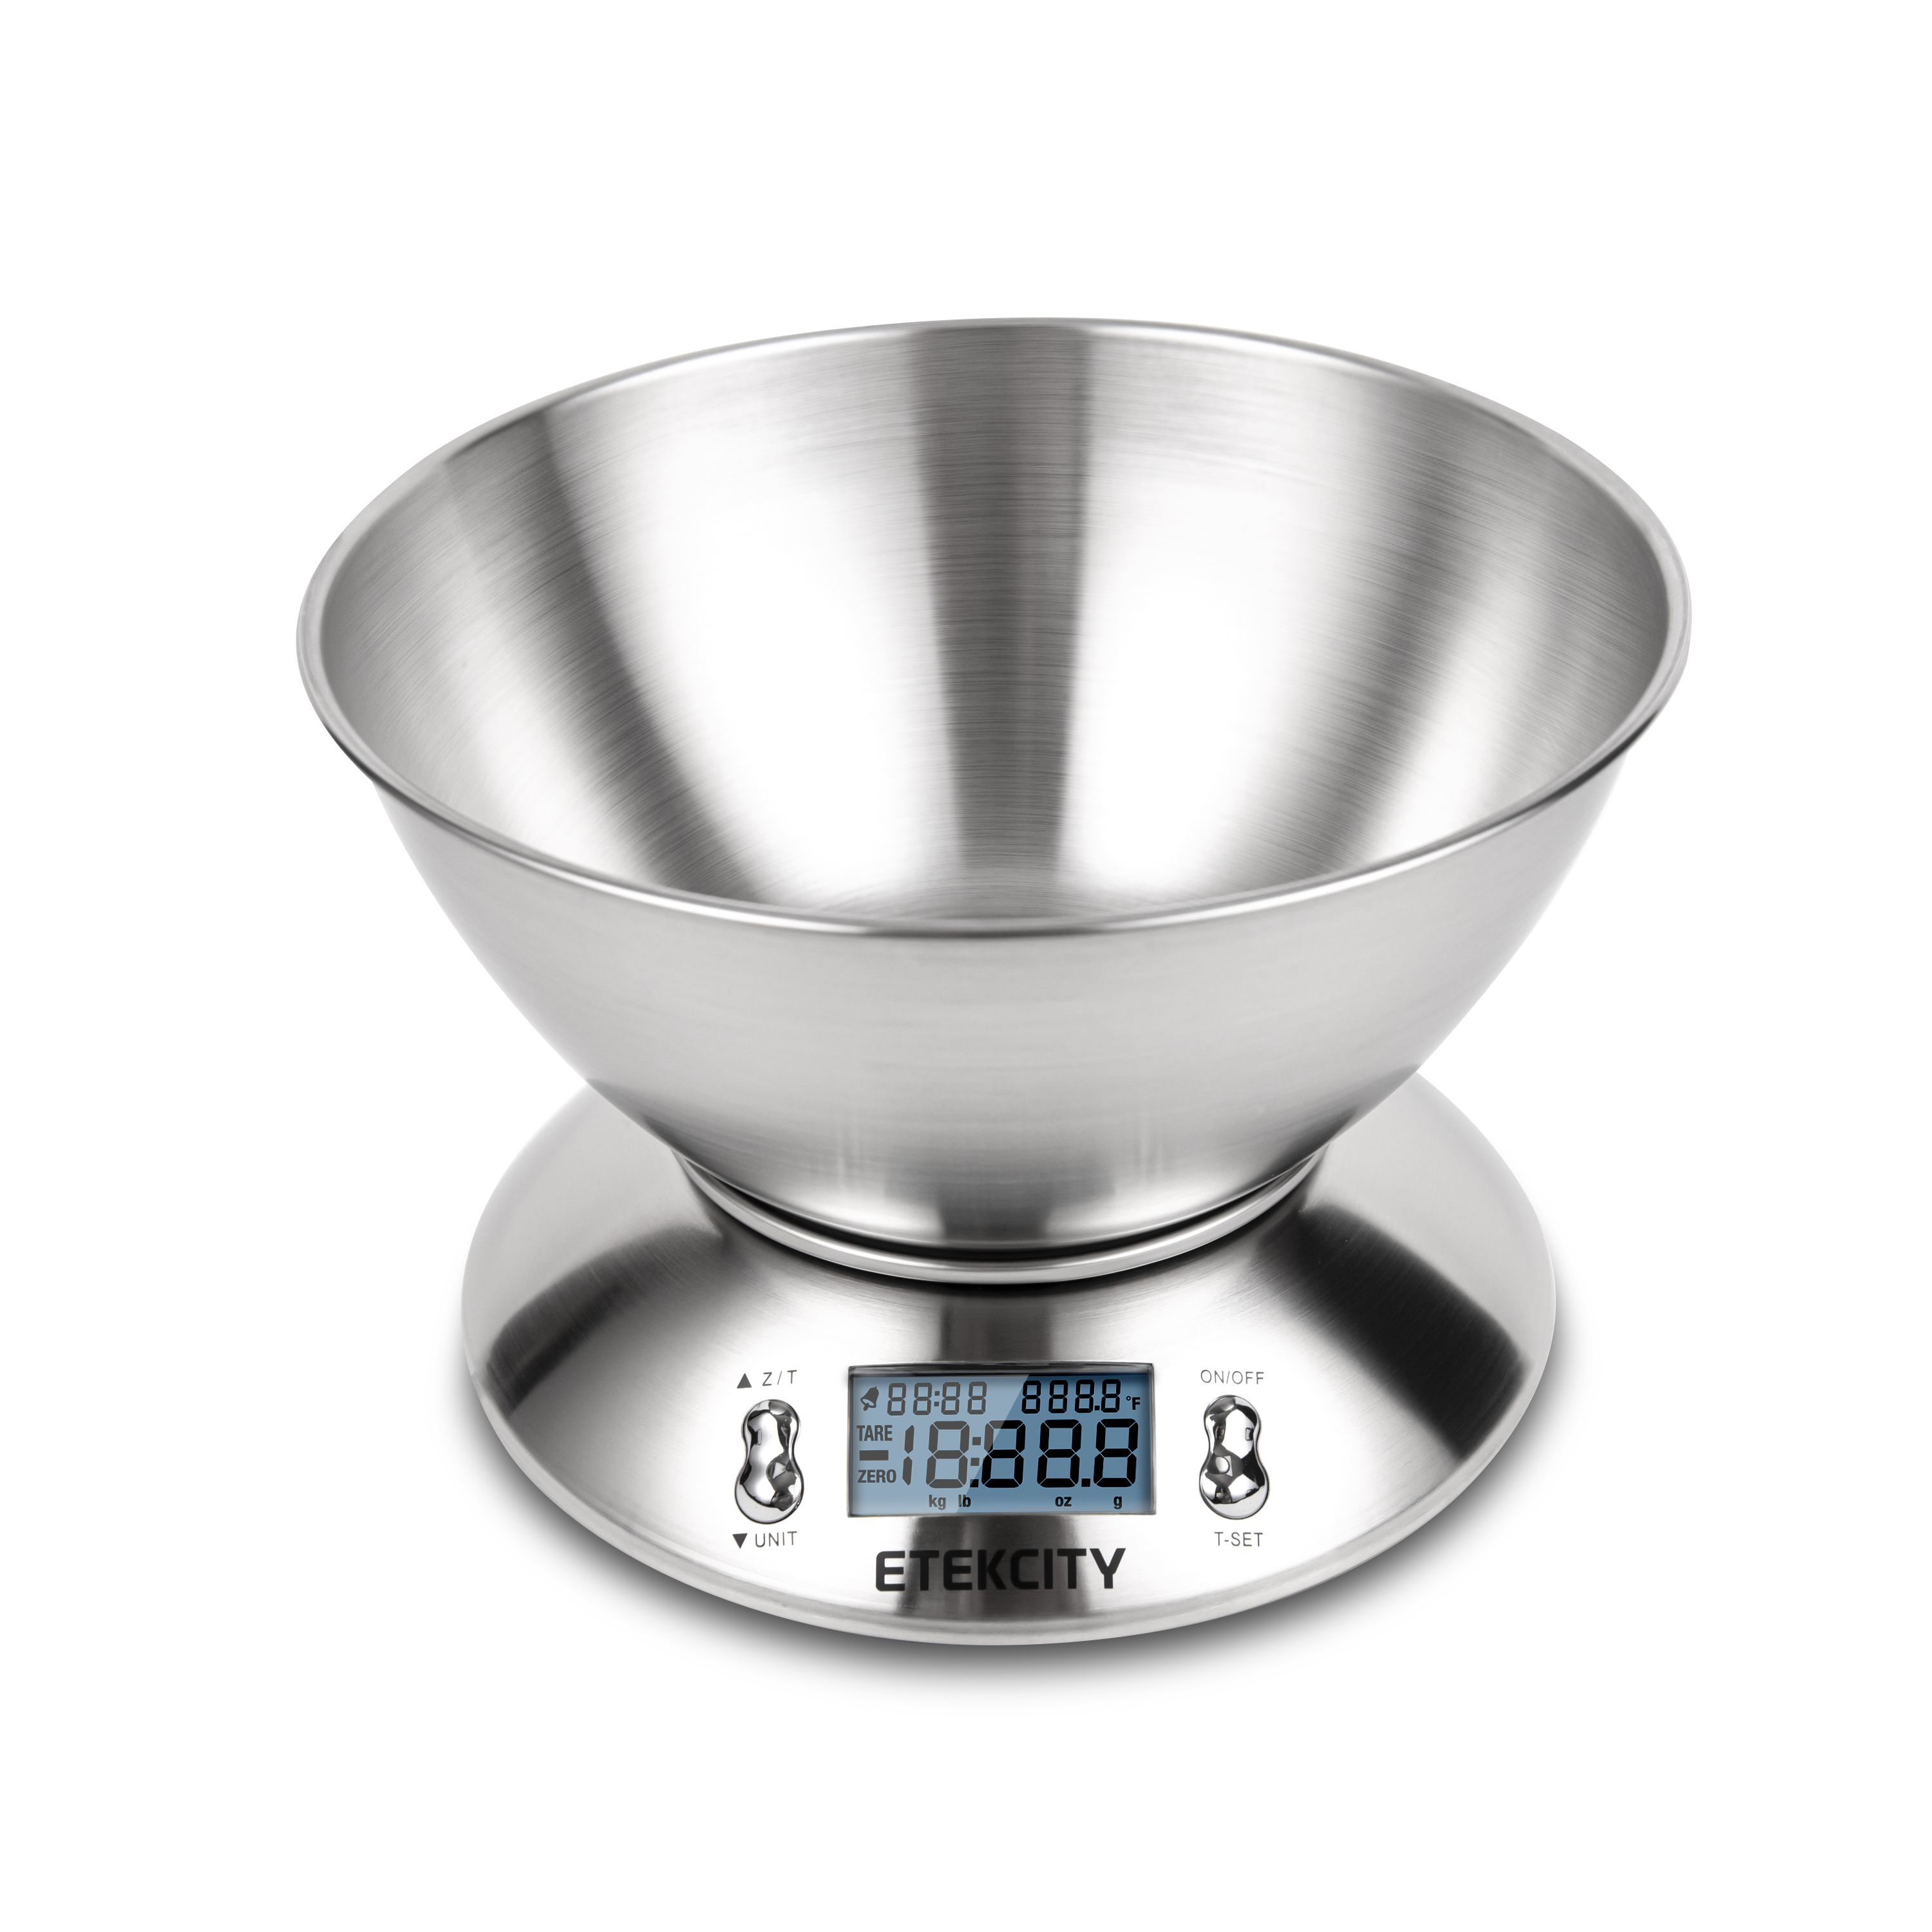 Etekcity Kitchen Scale, Digital Food Scale, with Removable Bowl, Stainless Steel, 11lb/5kg, Silver, EK4150 - image 4 of 12